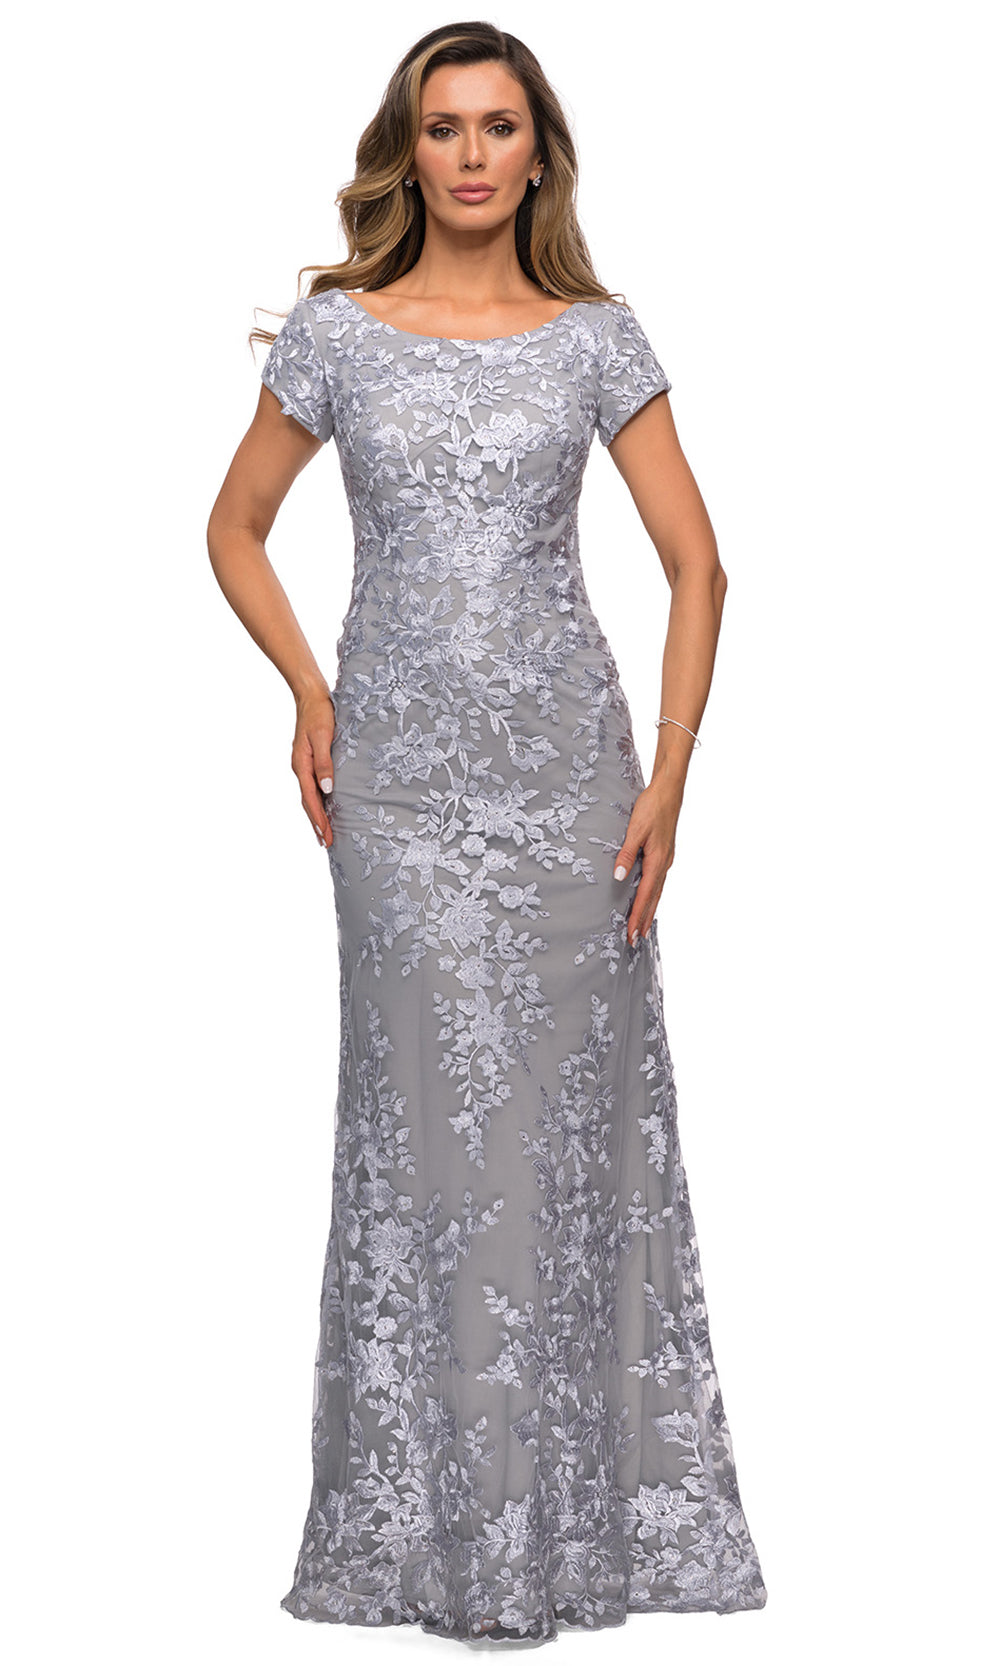 La Femme - 27842 Scoop Neck Lace Fitted Dress In Silver